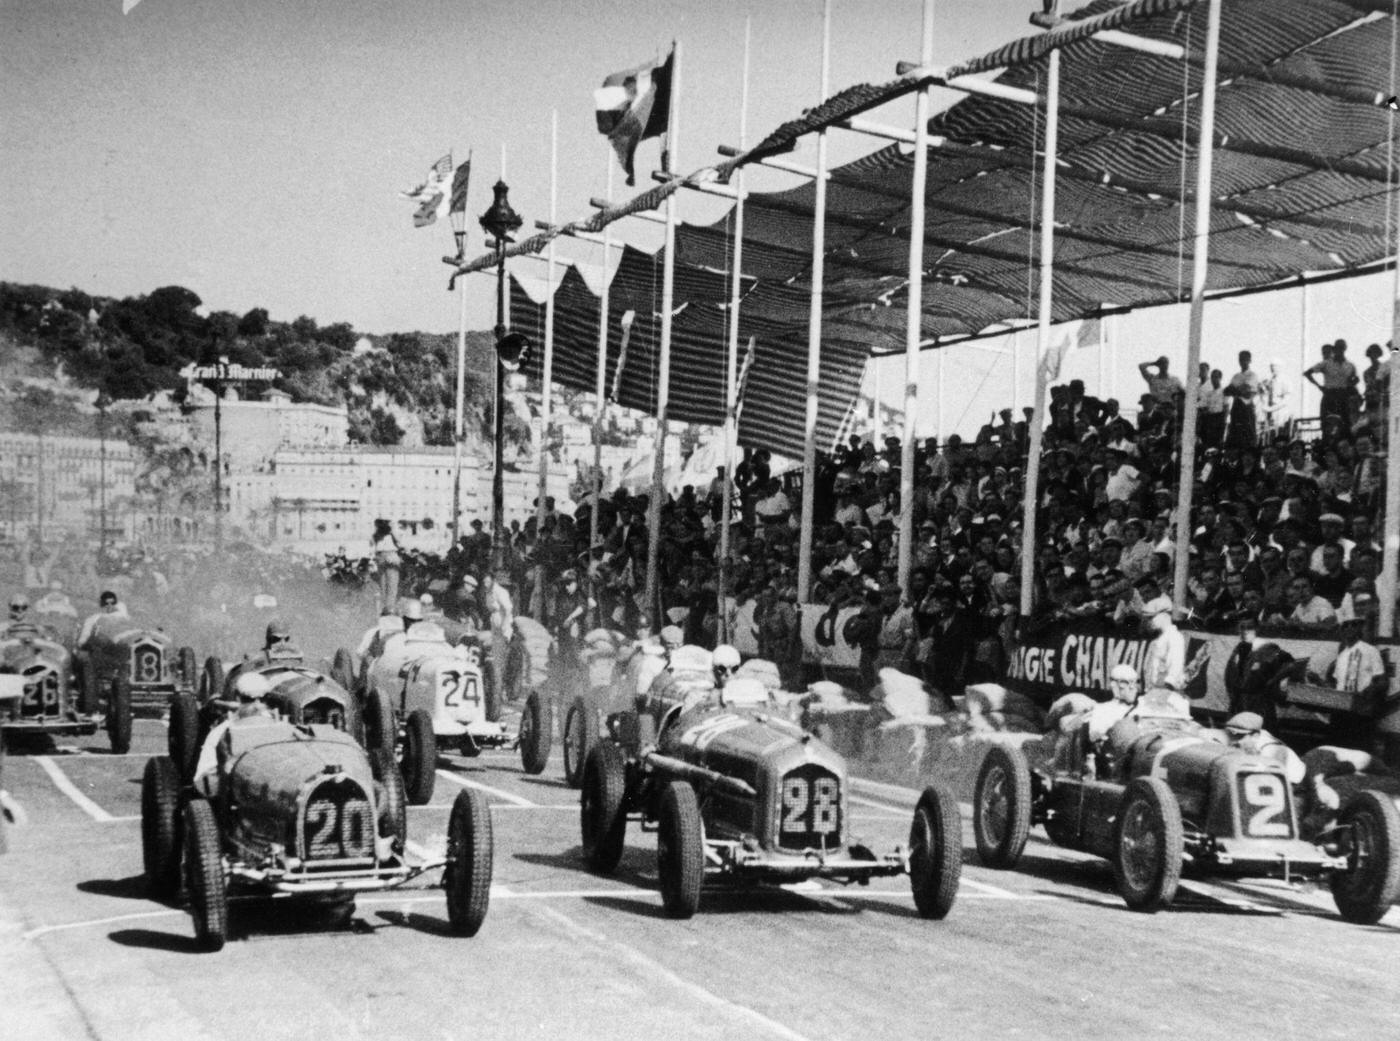 The starting grid for the Nice Grand Prix, 1934.